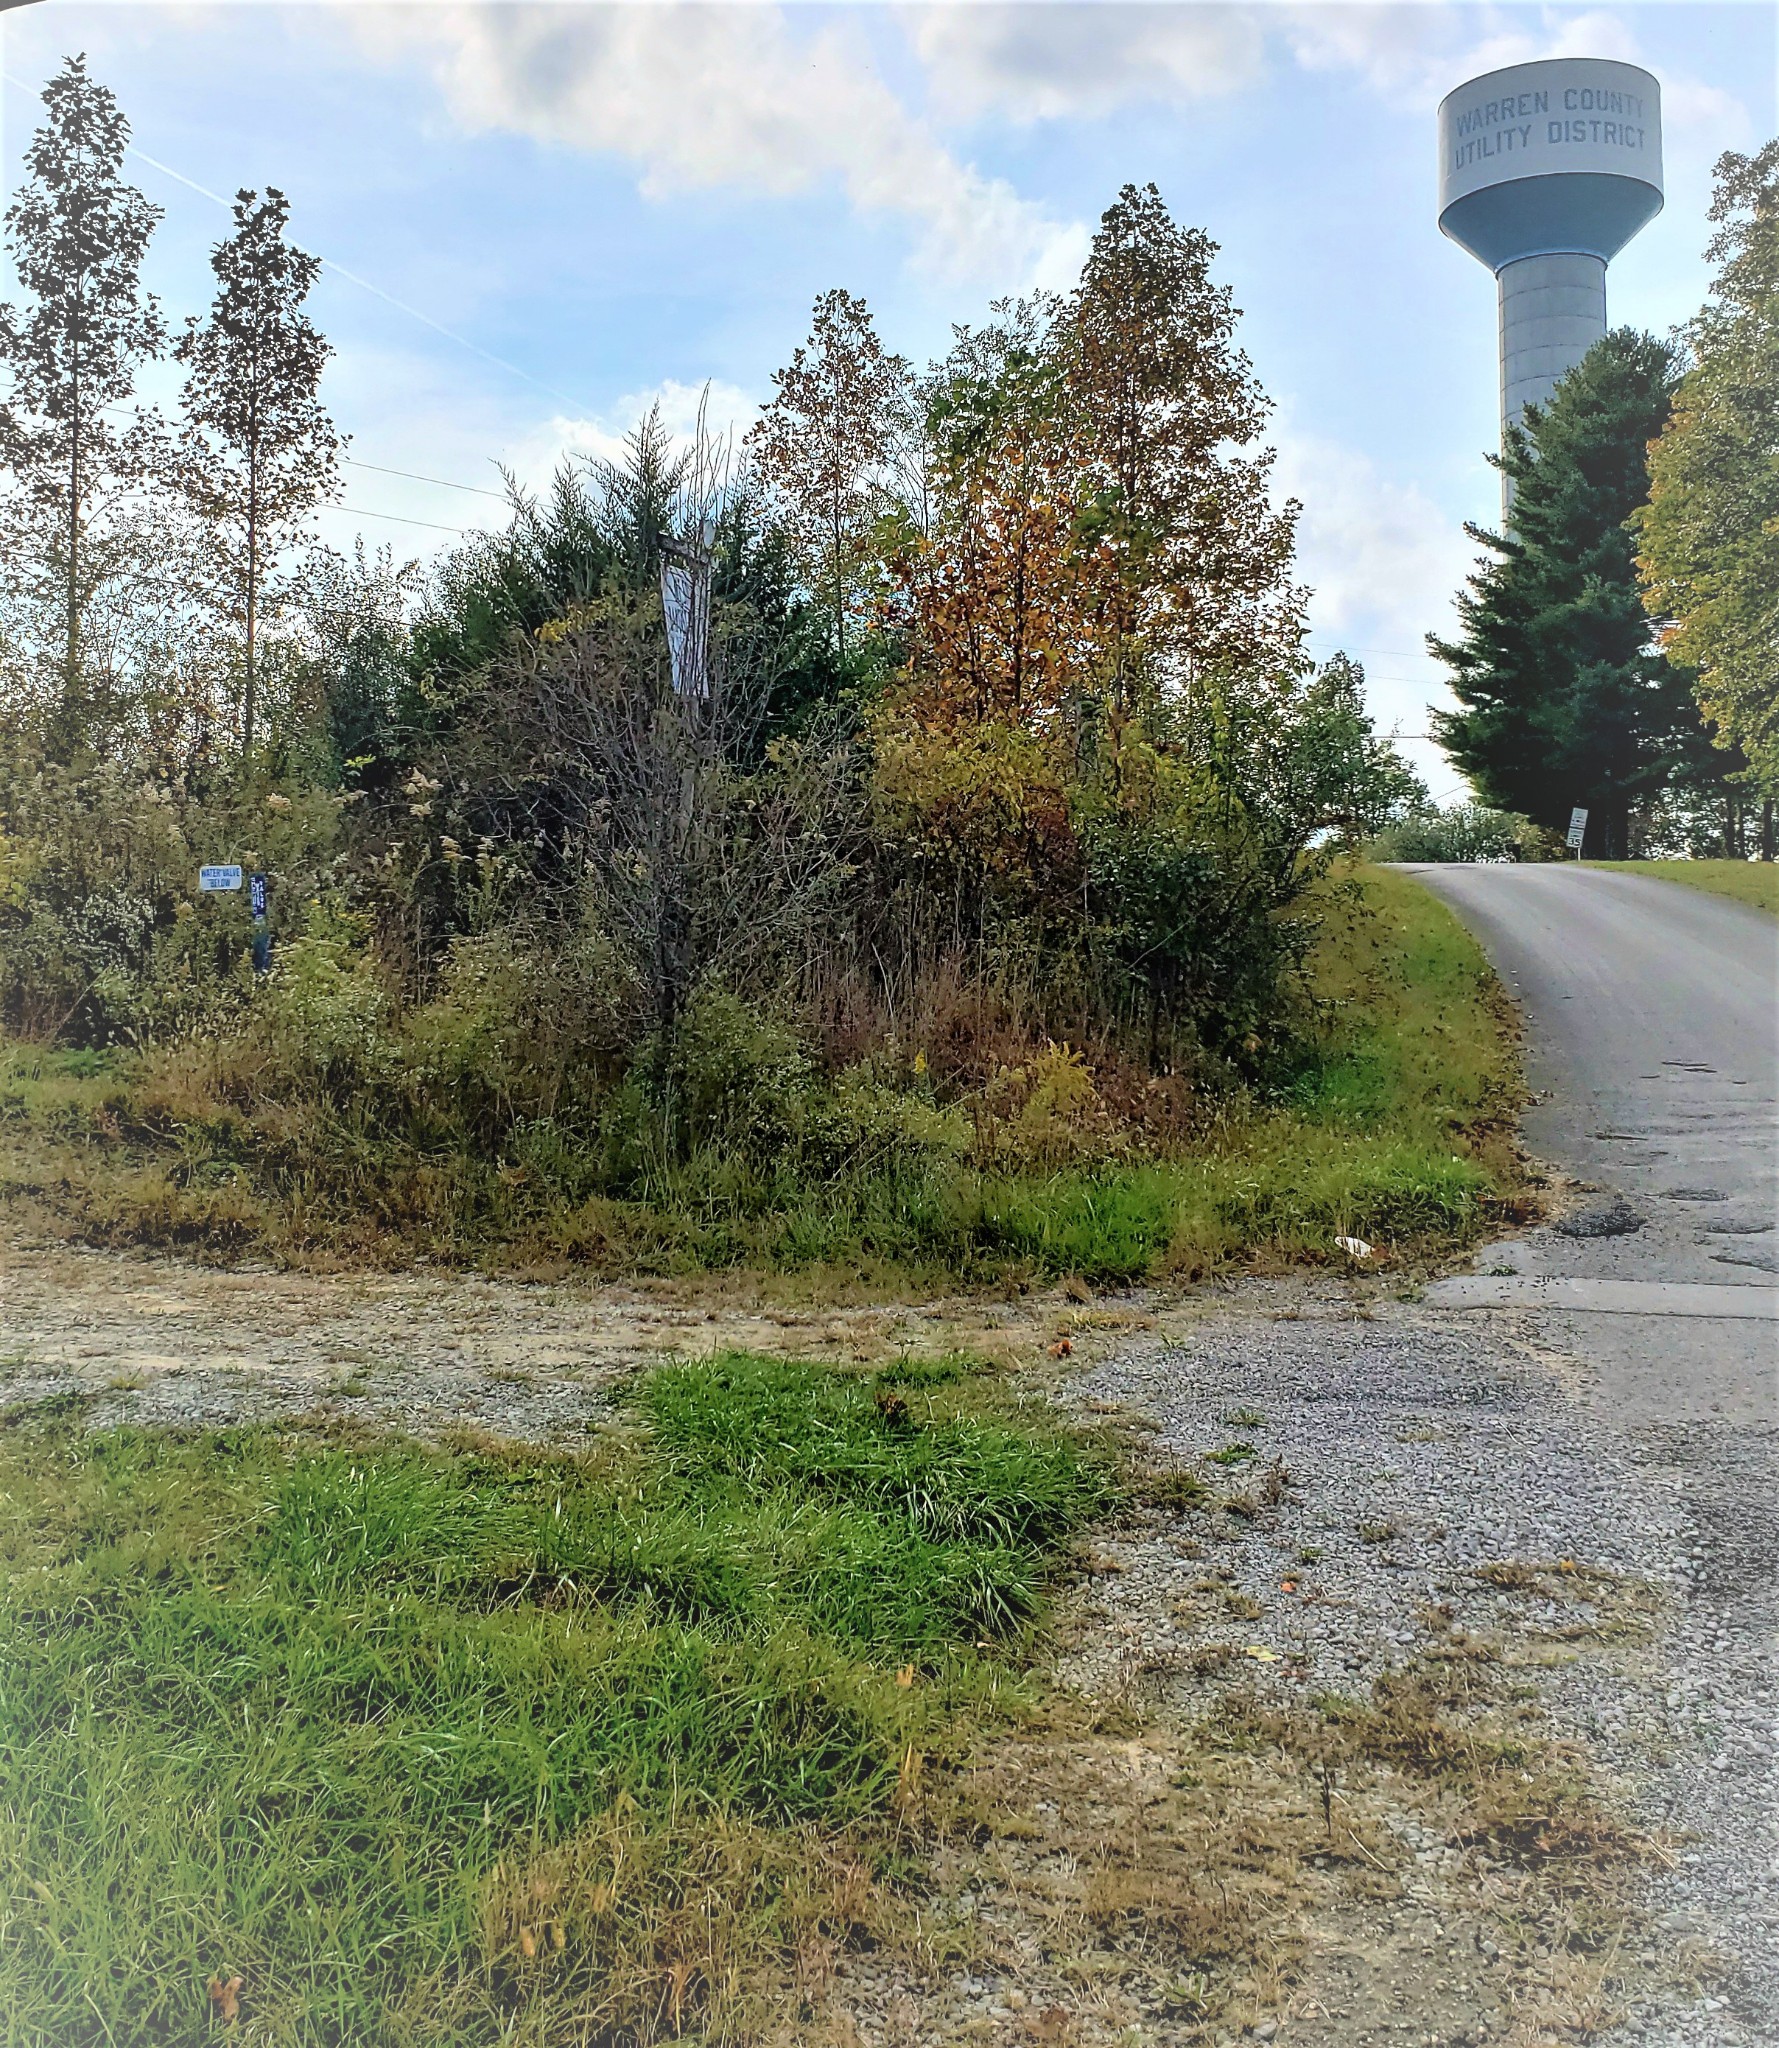 a view of a dirt road and a building